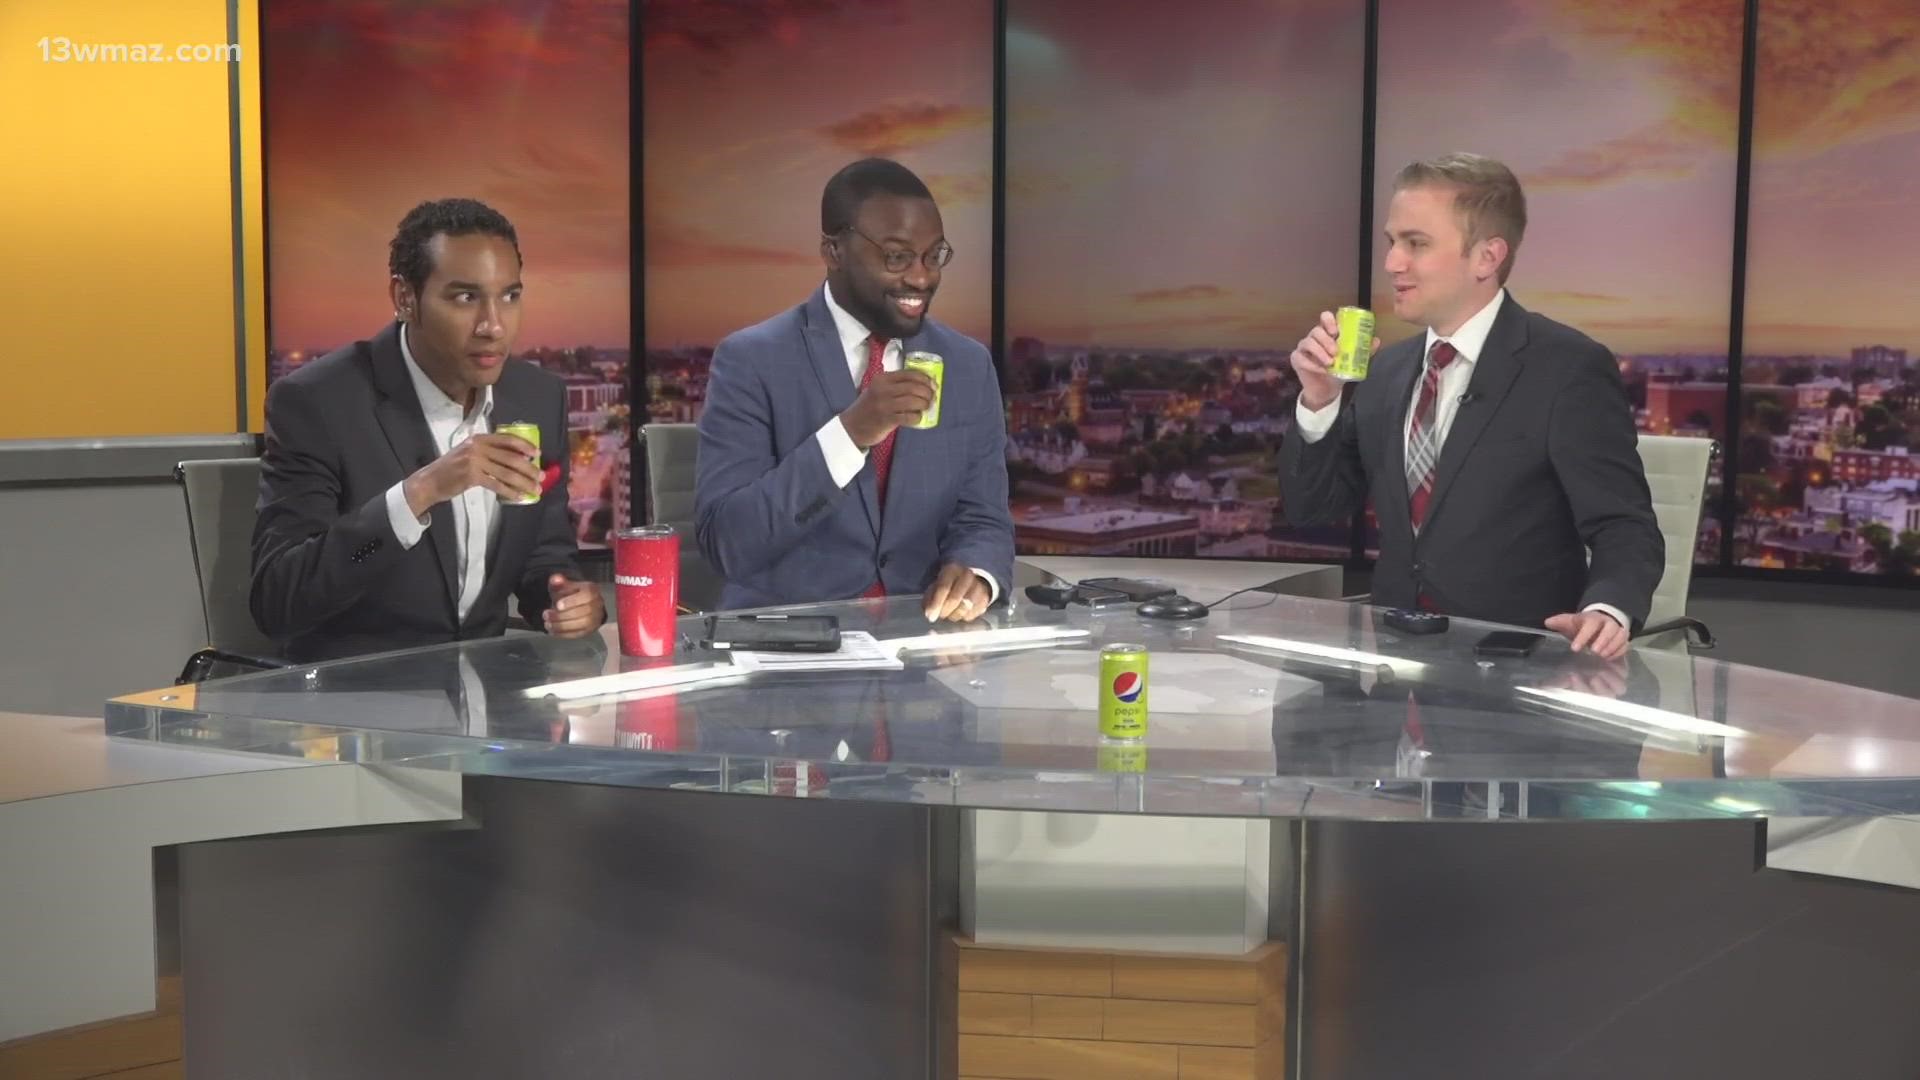 It's safe to say, morning anchor Wanya Reese did not like it.